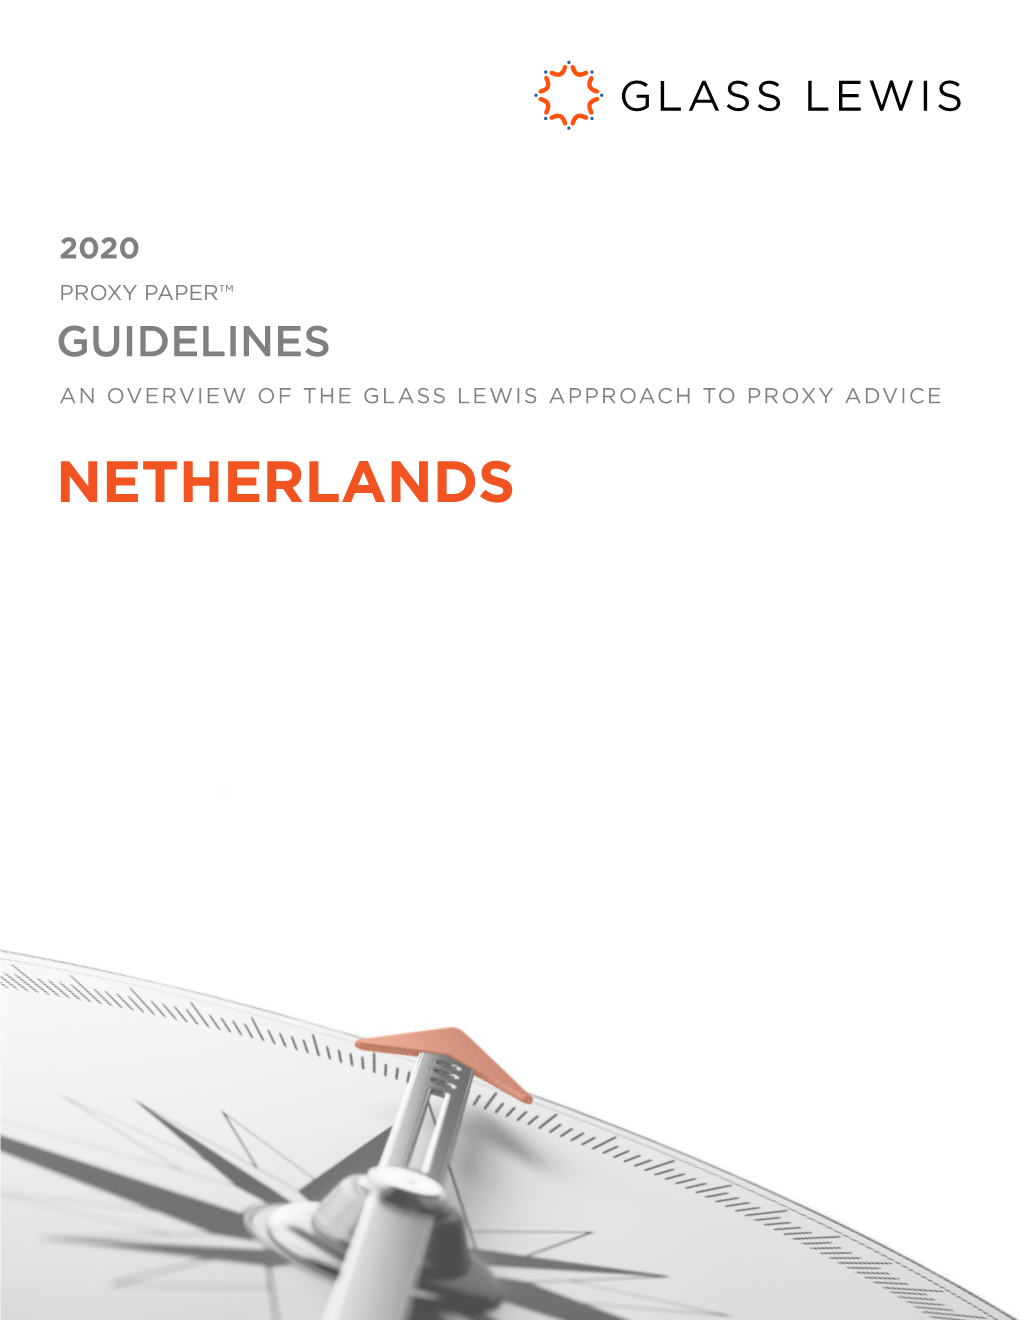 NETHERLANDS Table of Contents